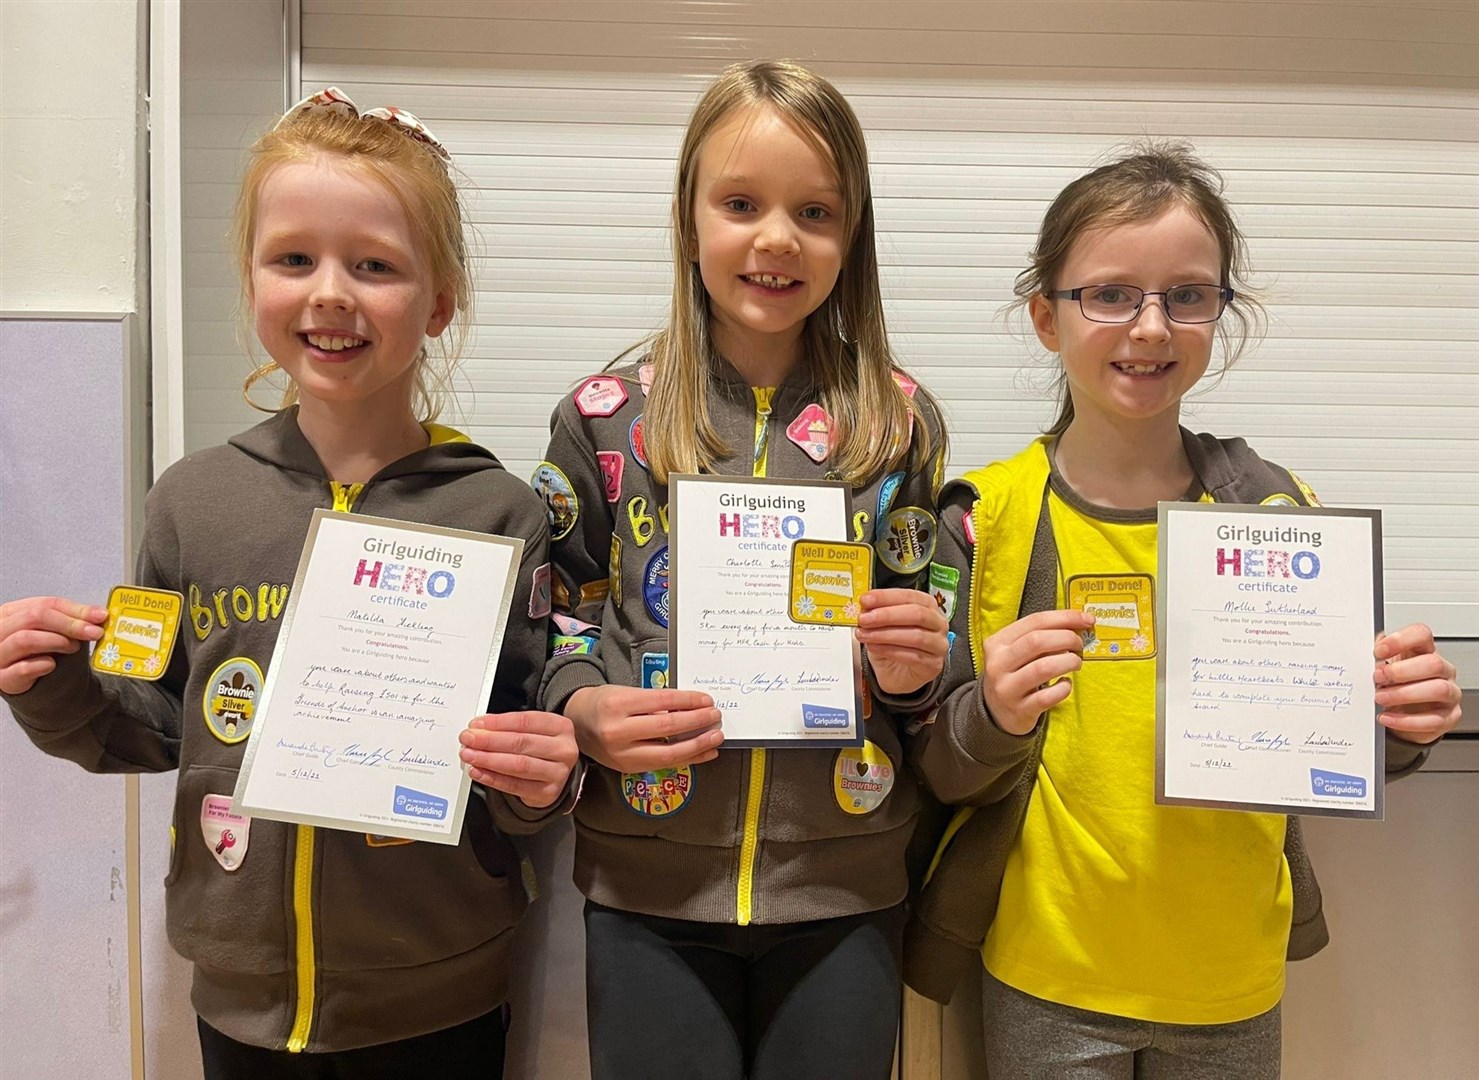 Left to right: Matilda Fickling, Charlotte Smith and Mollie Sutherland.